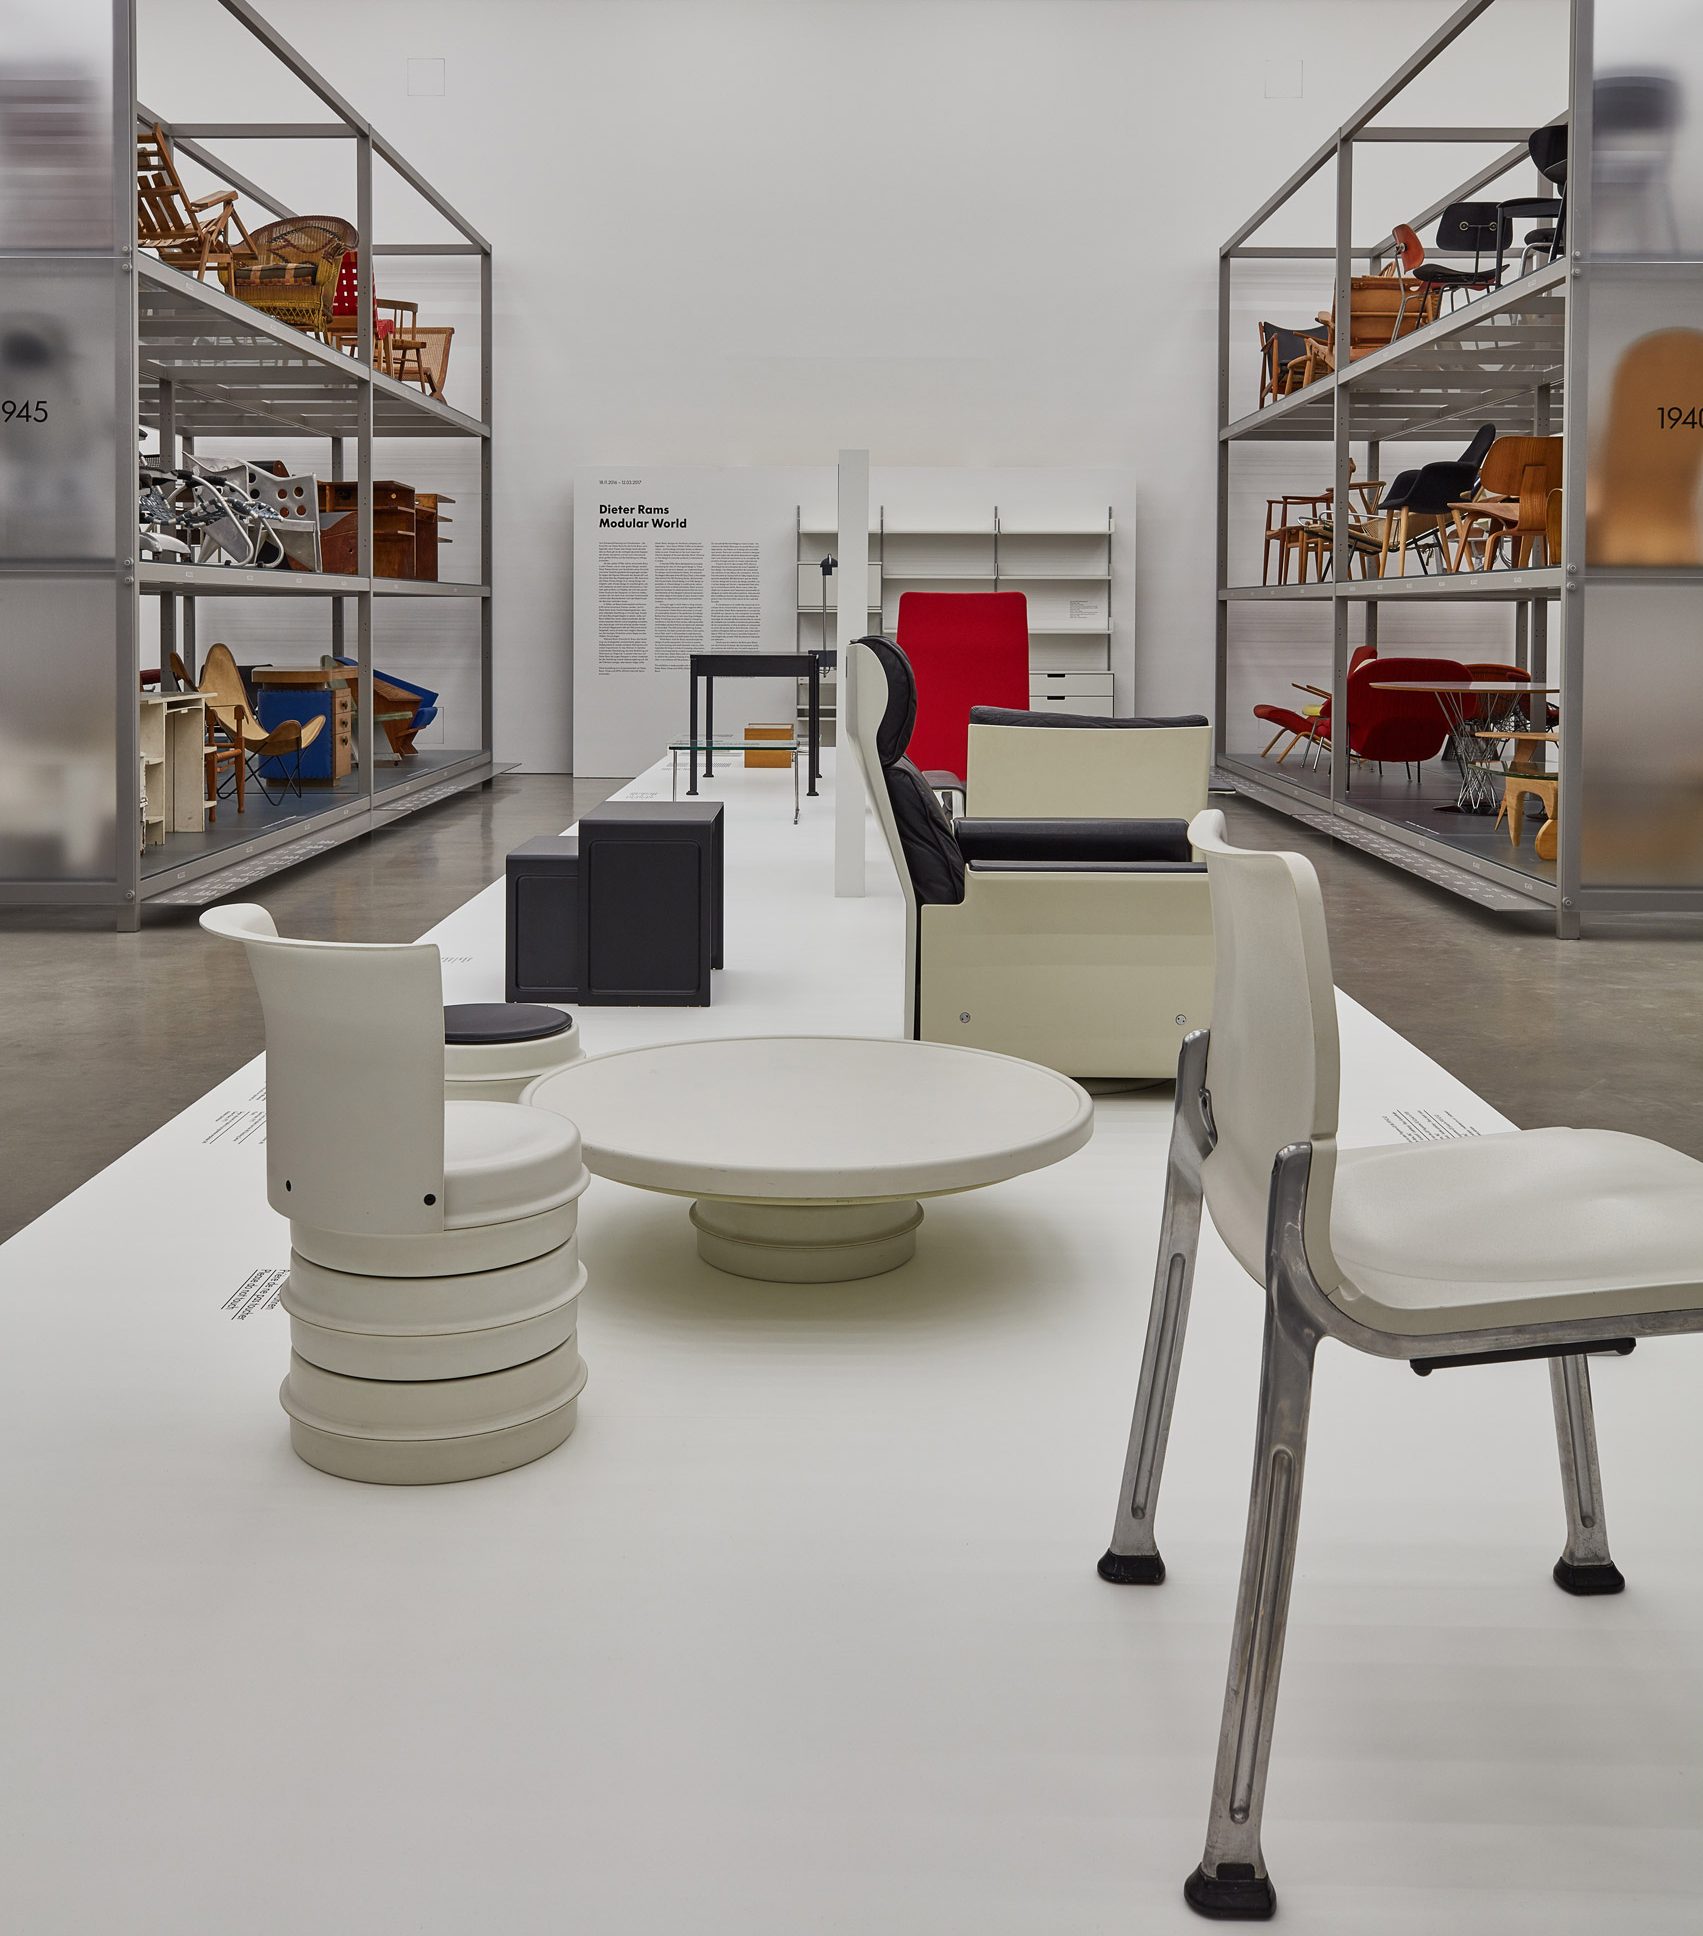 Rams' furniture showcased in Modular World exhibition at Vitra Campus